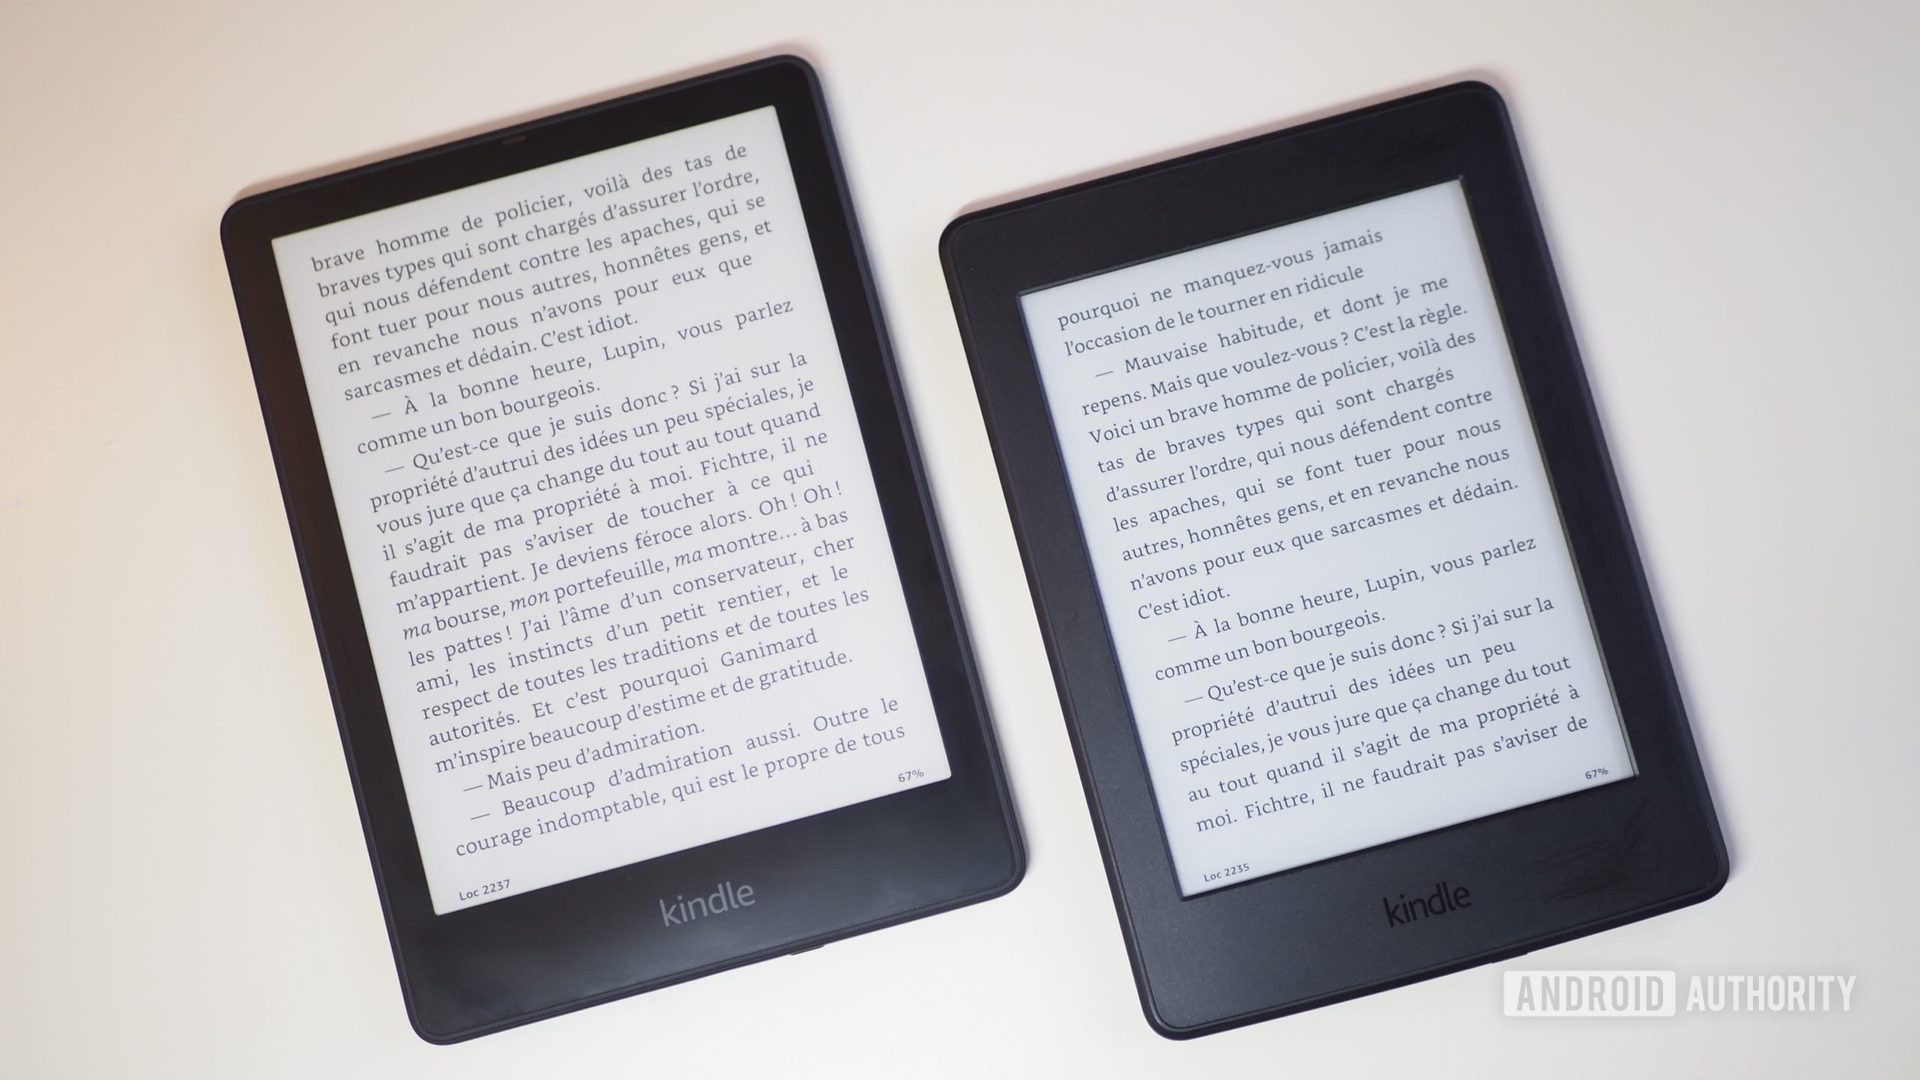 Amazon Kindle Paperwhite 2021 next to Paperwhite 2015, laying on a table, showing a book